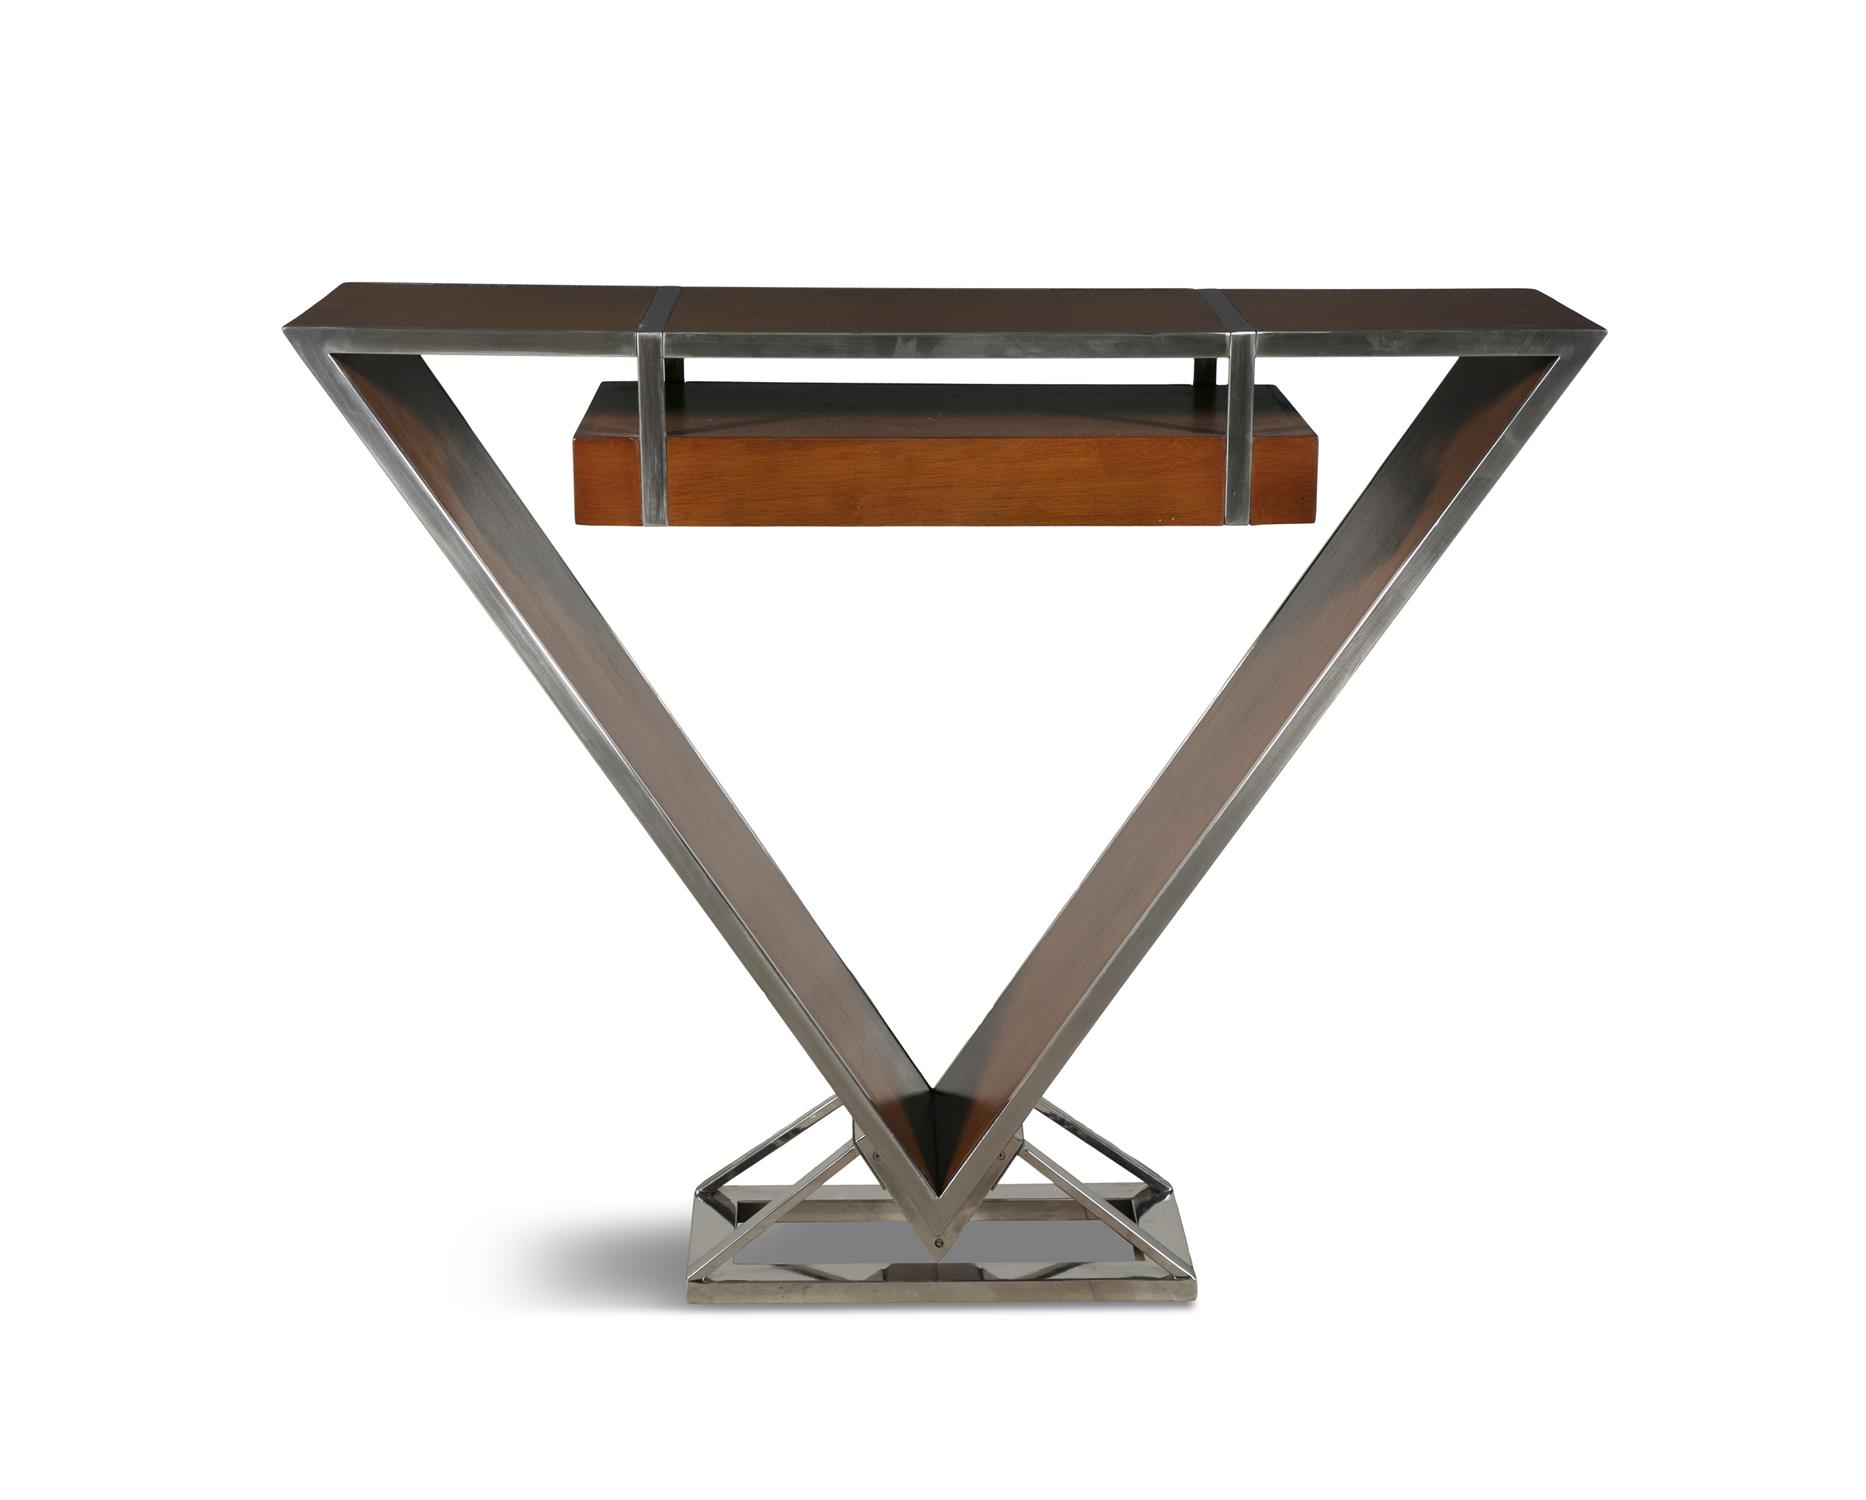 CONSOLE A triangular shaped console with a single drawer. Chrome and teak. France. - Image 7 of 7